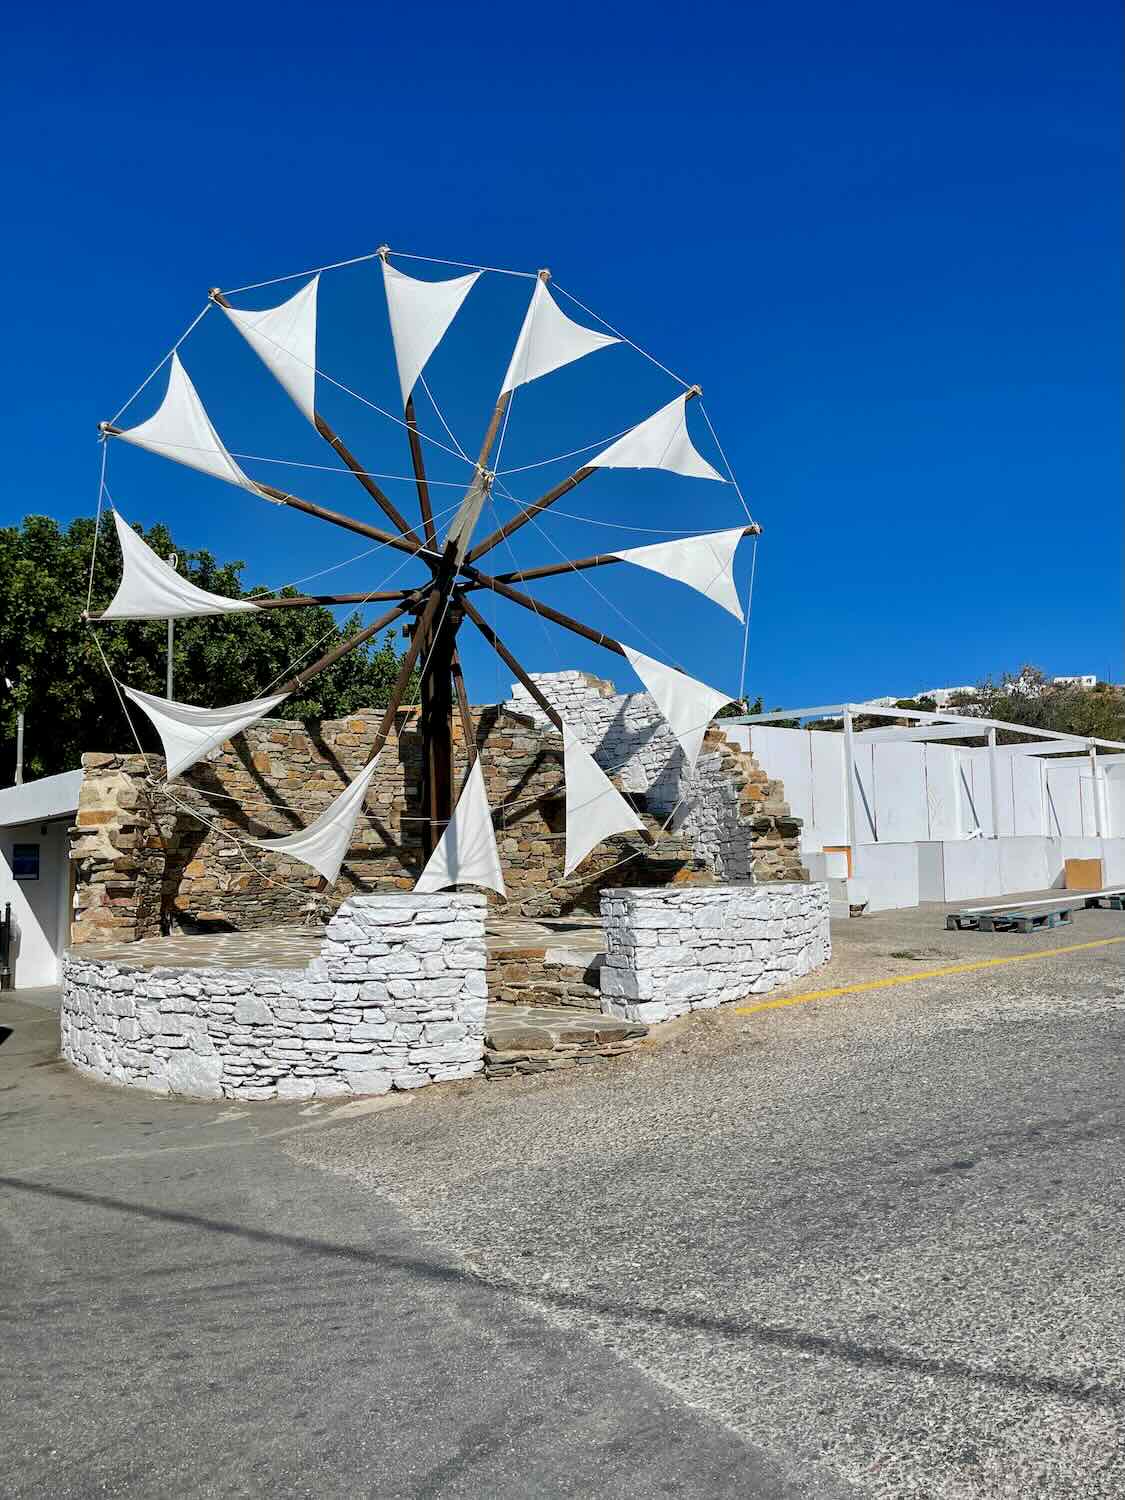 A restored traditional windmill in Sifnos with white and blue sails, standing as a symbol of the island's heritage, a unique sight on a Sifnos.